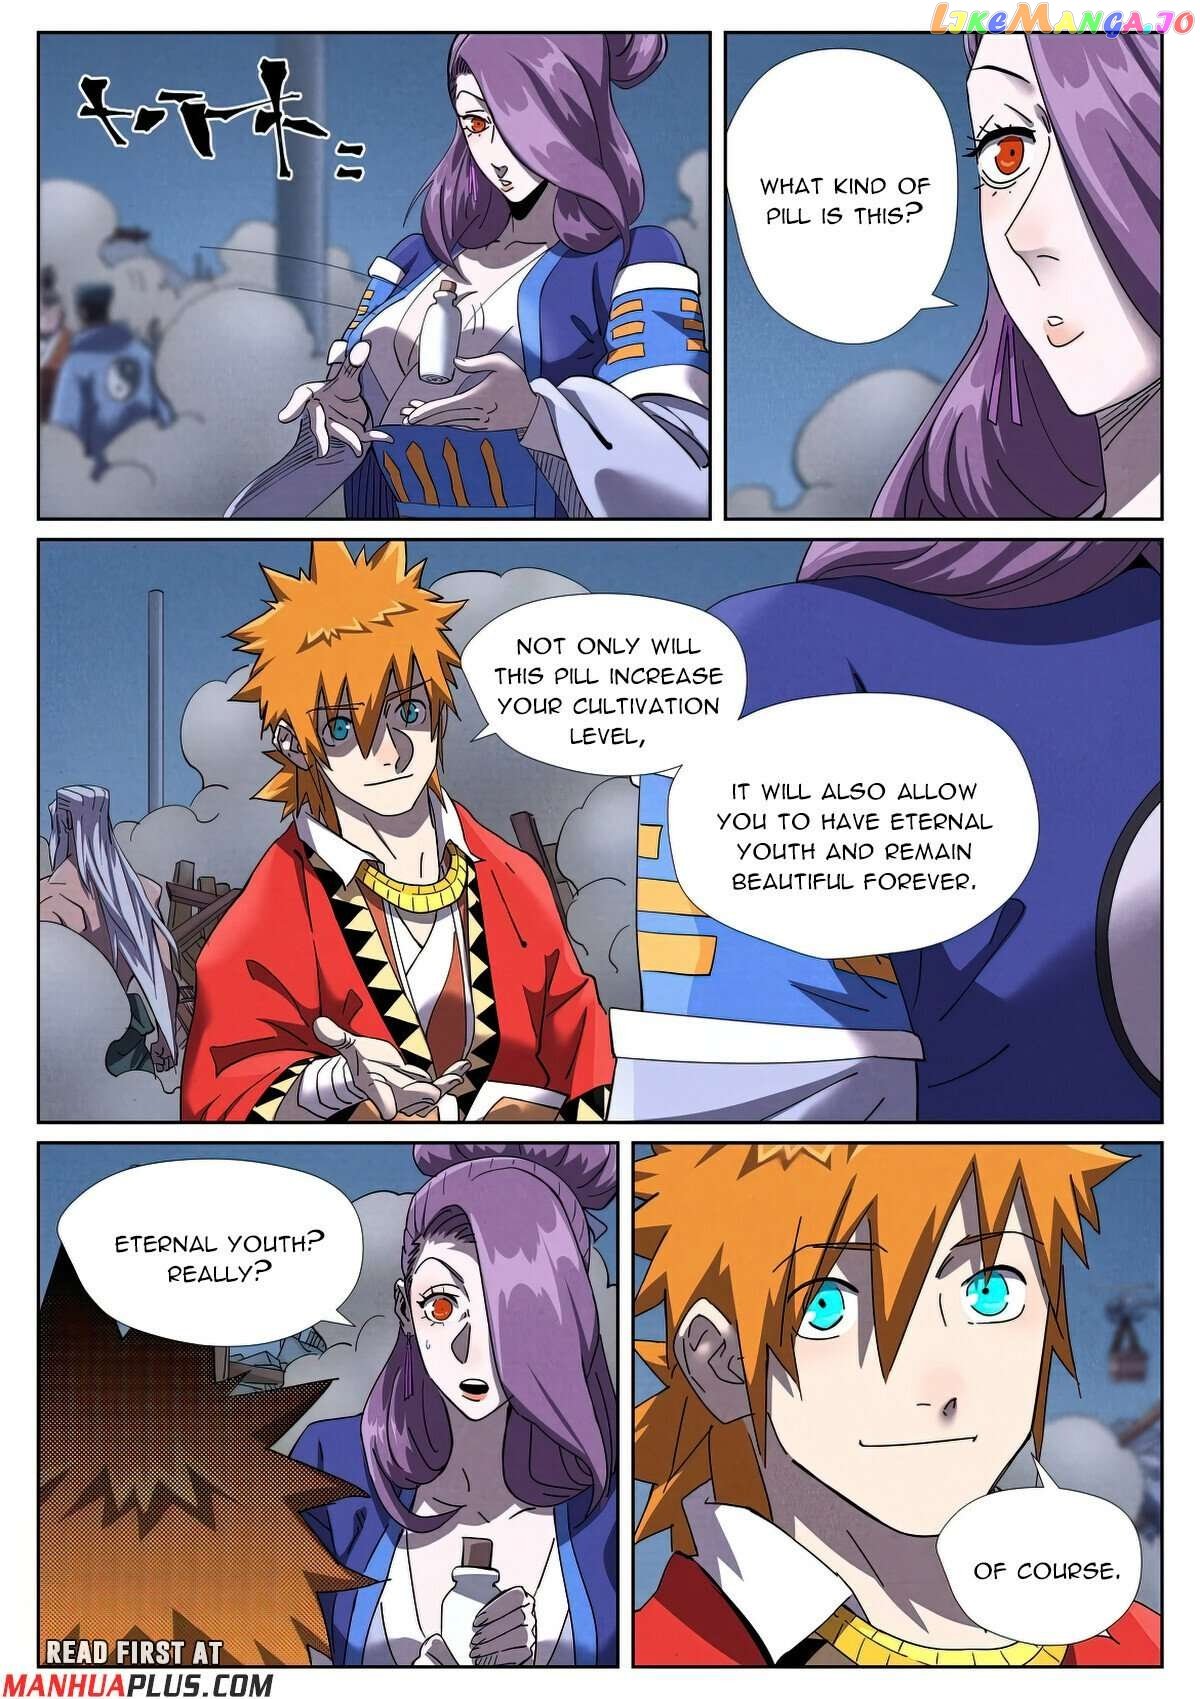 Tales of Demons and Gods Manhua Chapter 453.5 - Page 2